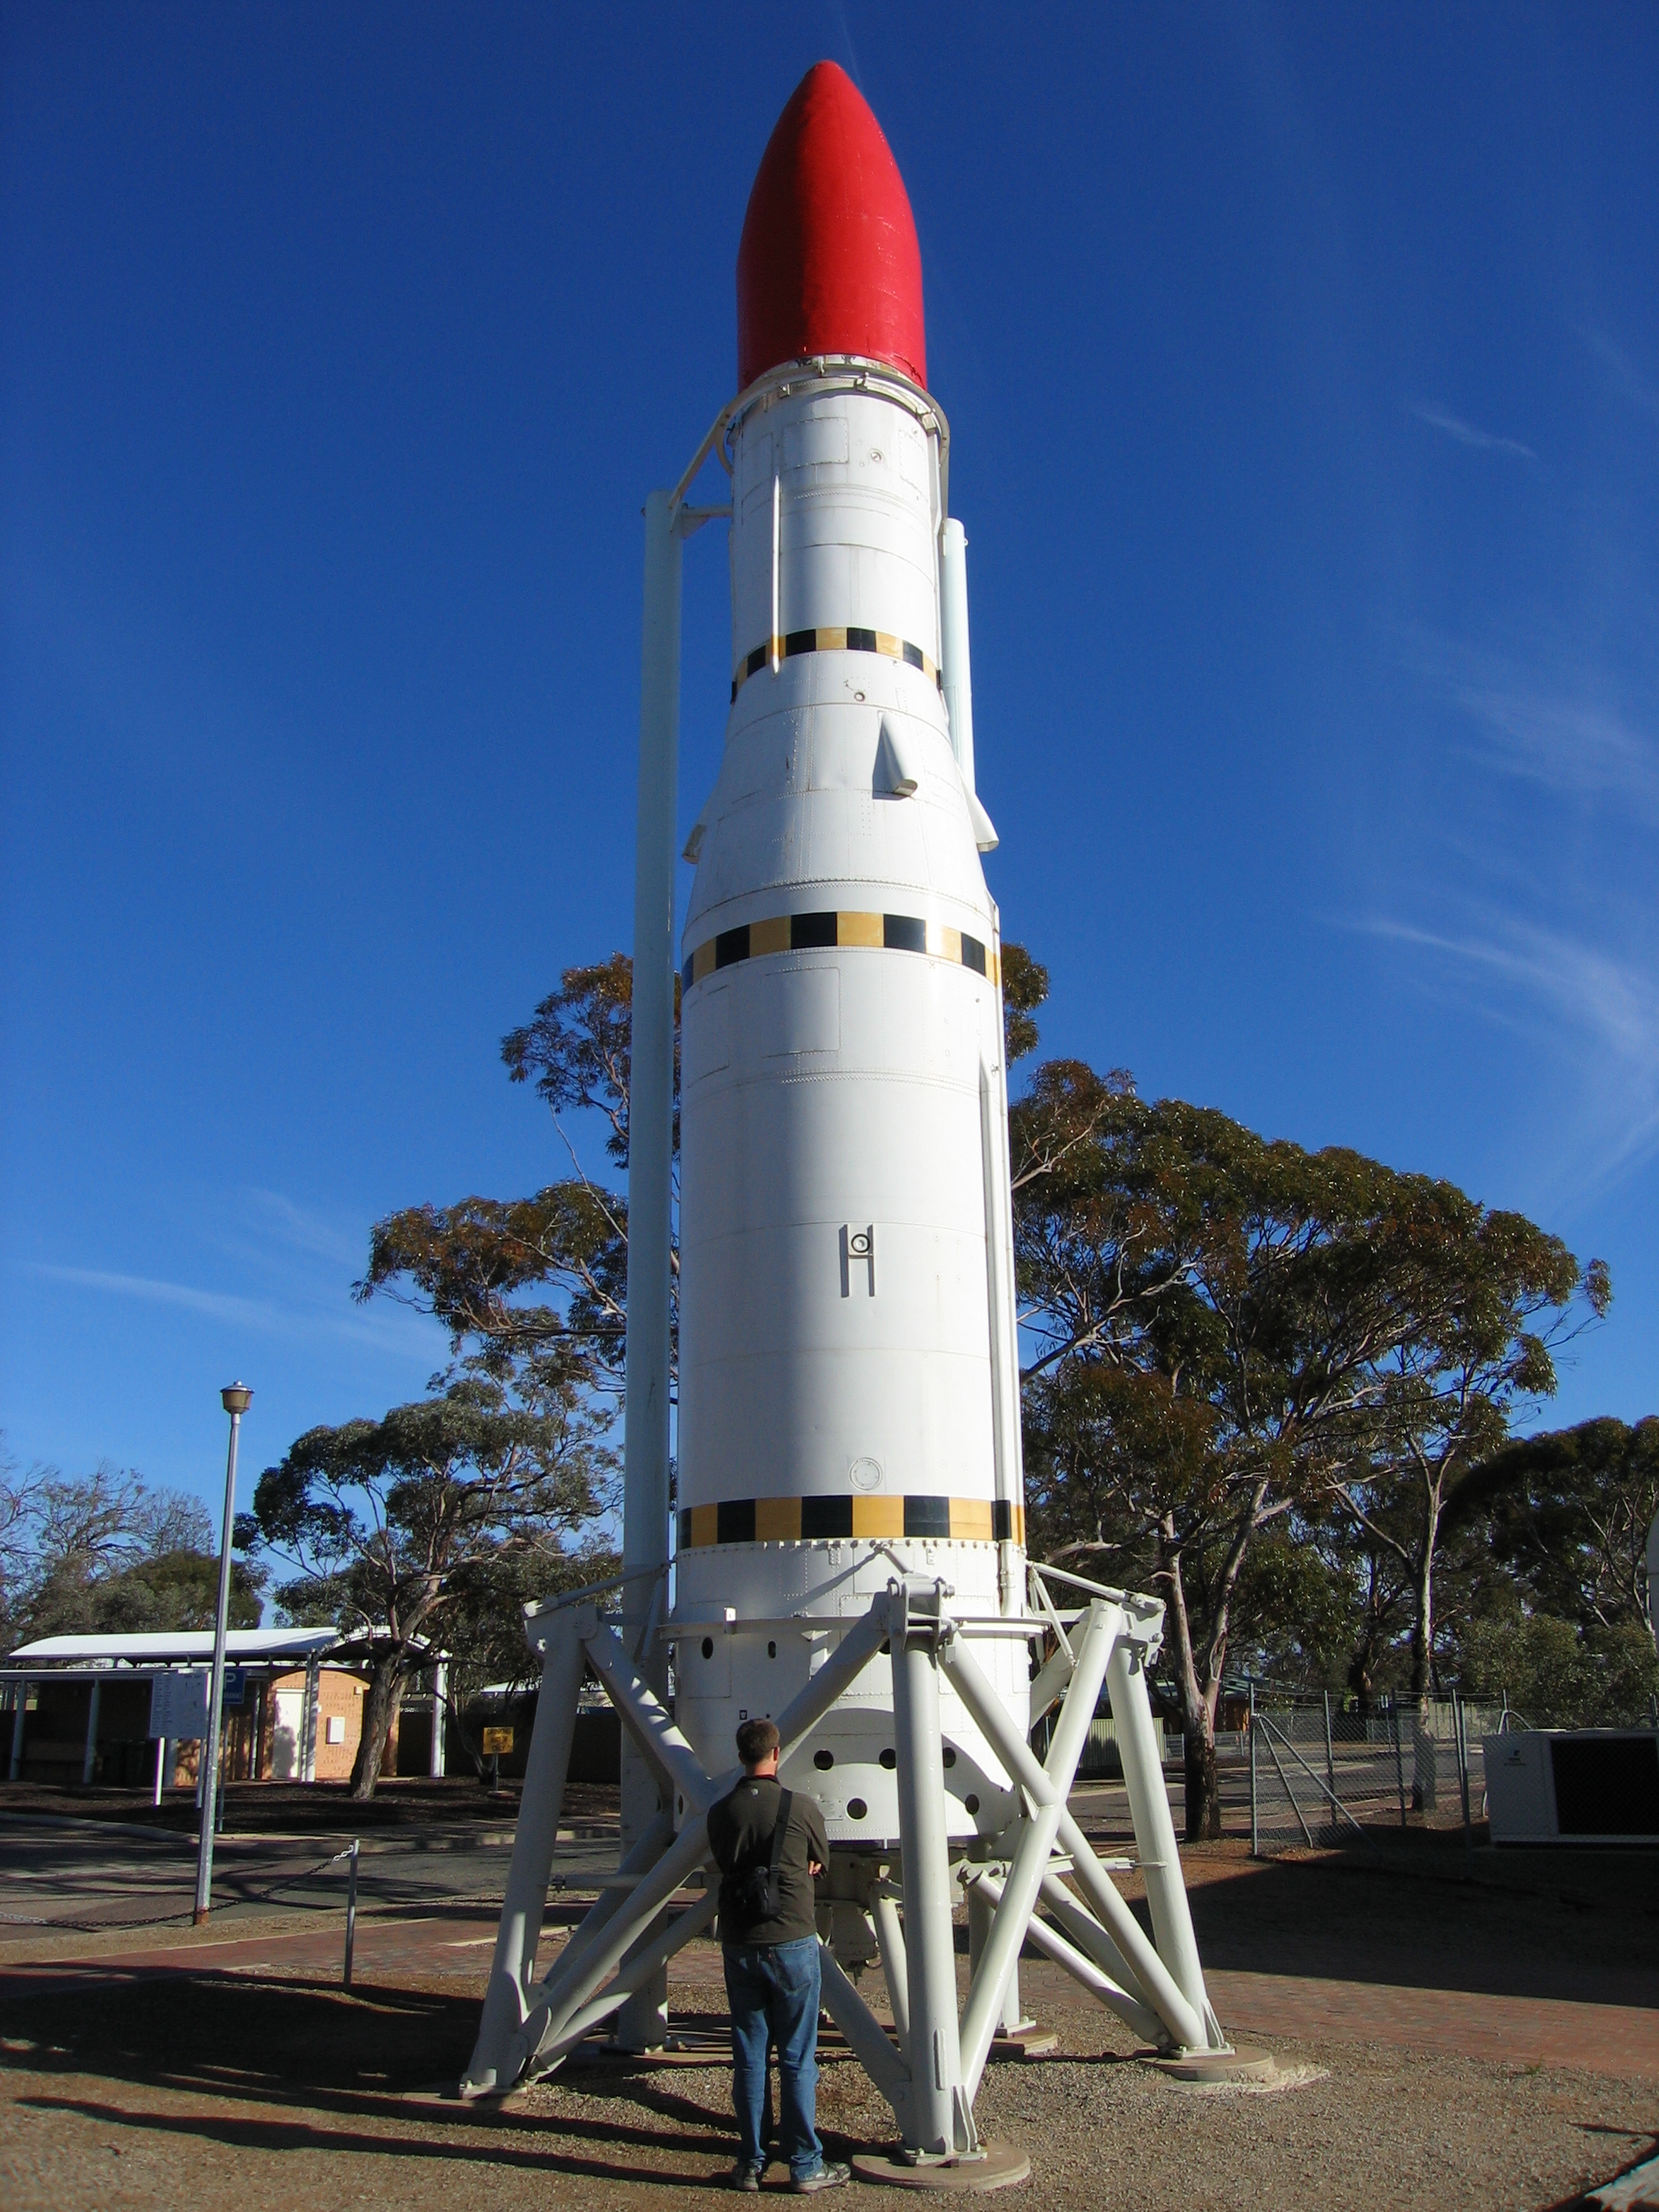 Woomera Australian Defense Force Facility and Touristic Rocket Park – Not Your ...